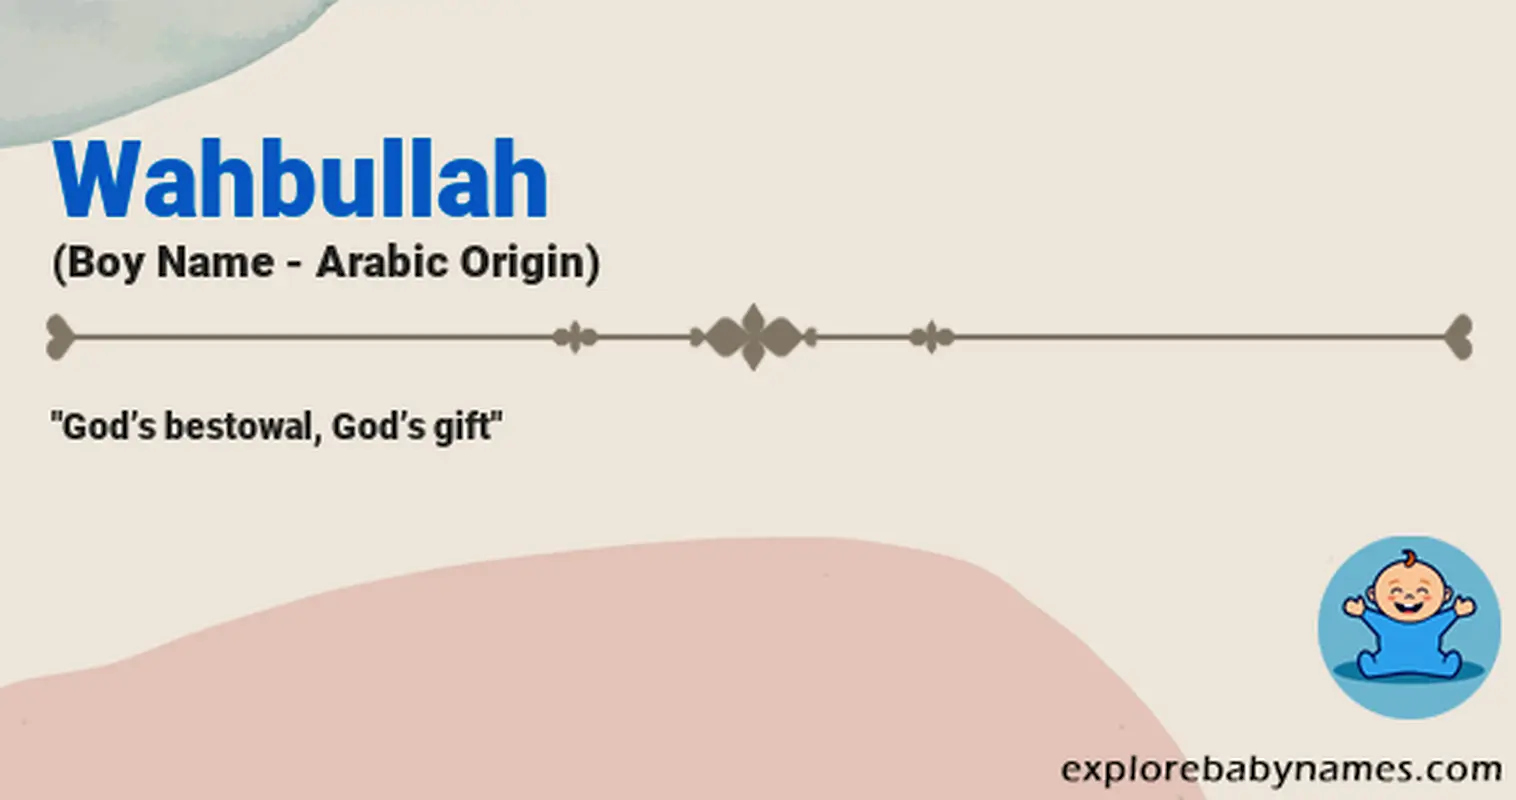 Meaning of Wahbullah